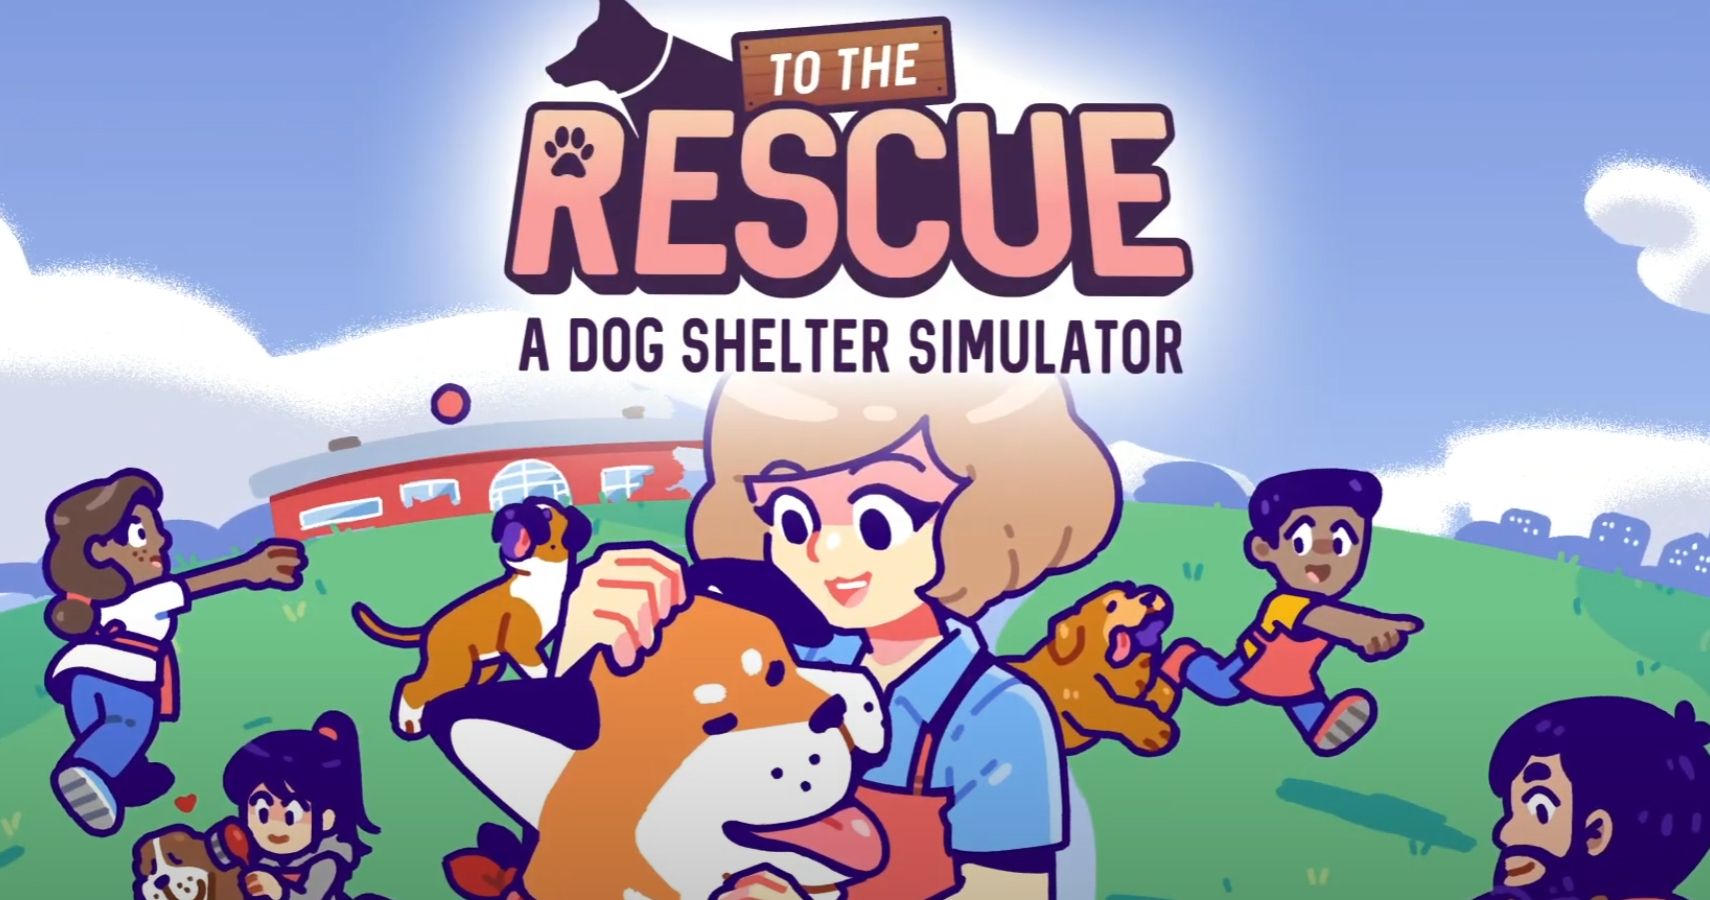 Dog Shelter Sim To The Rescue! is partnerting with the Pet Finder Foundation to raise money for animal shelters